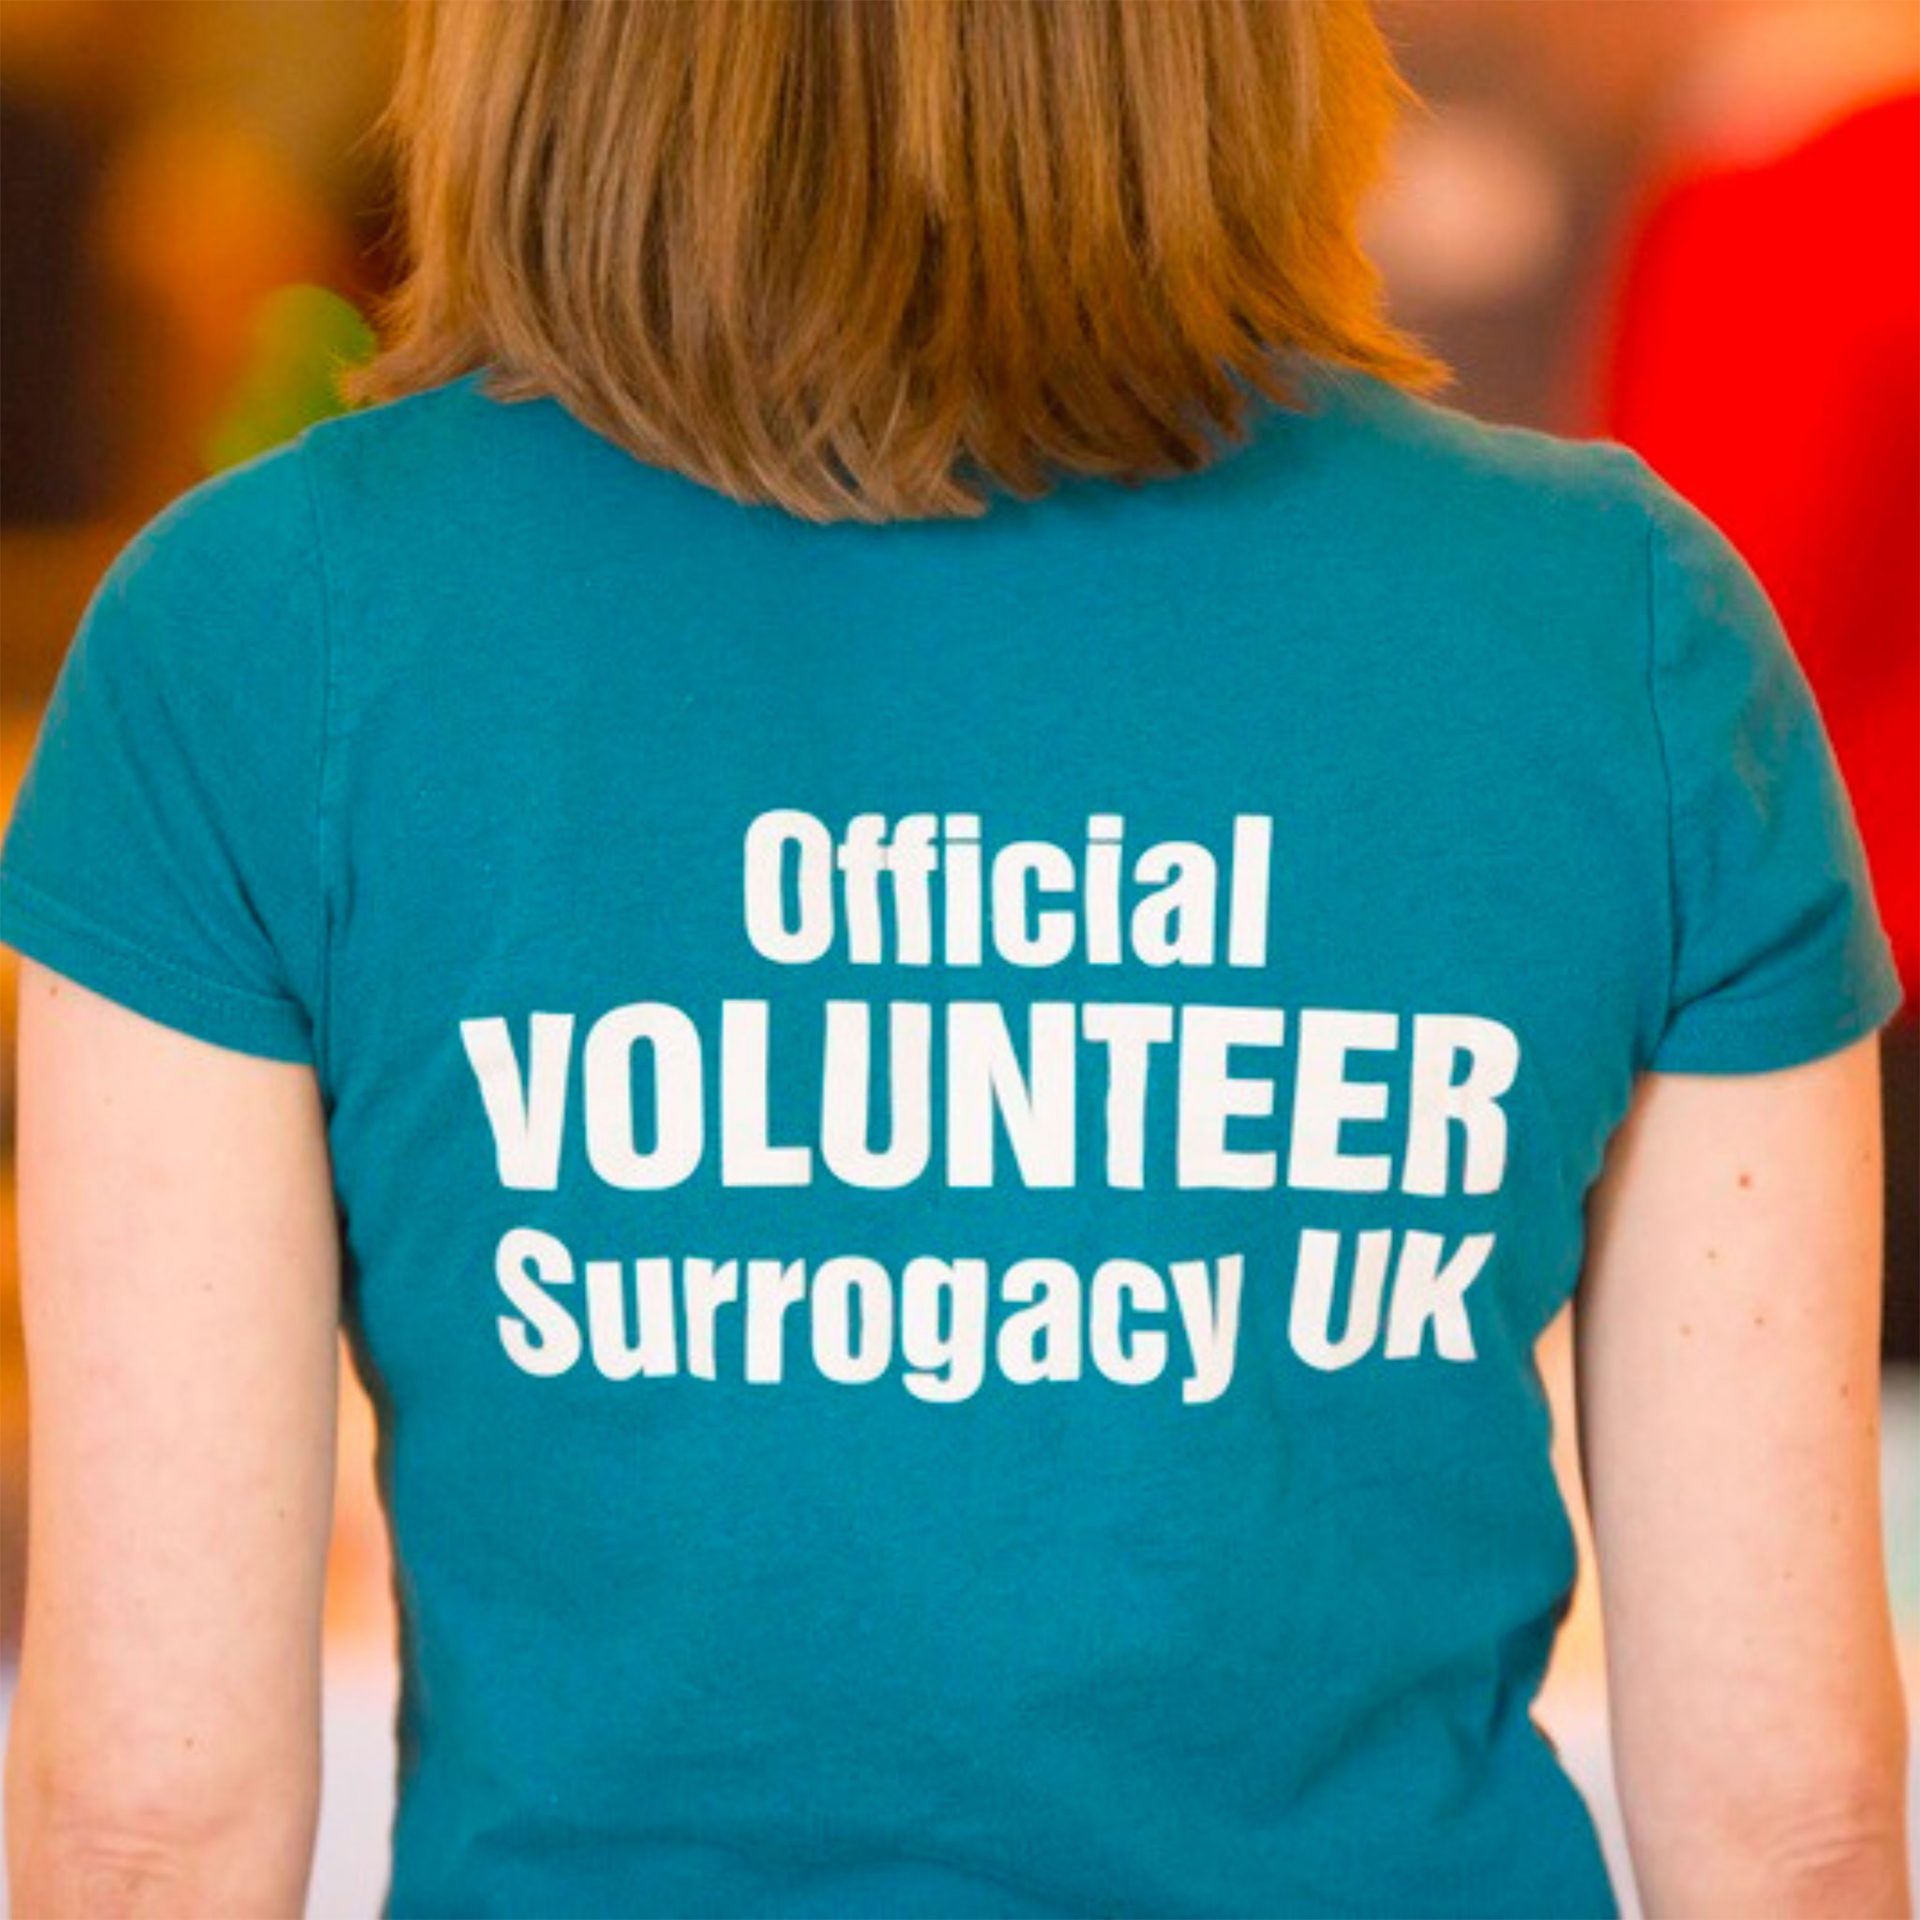 Save the Date - Official Volunteer Surrogacy UK on a blue t shirt